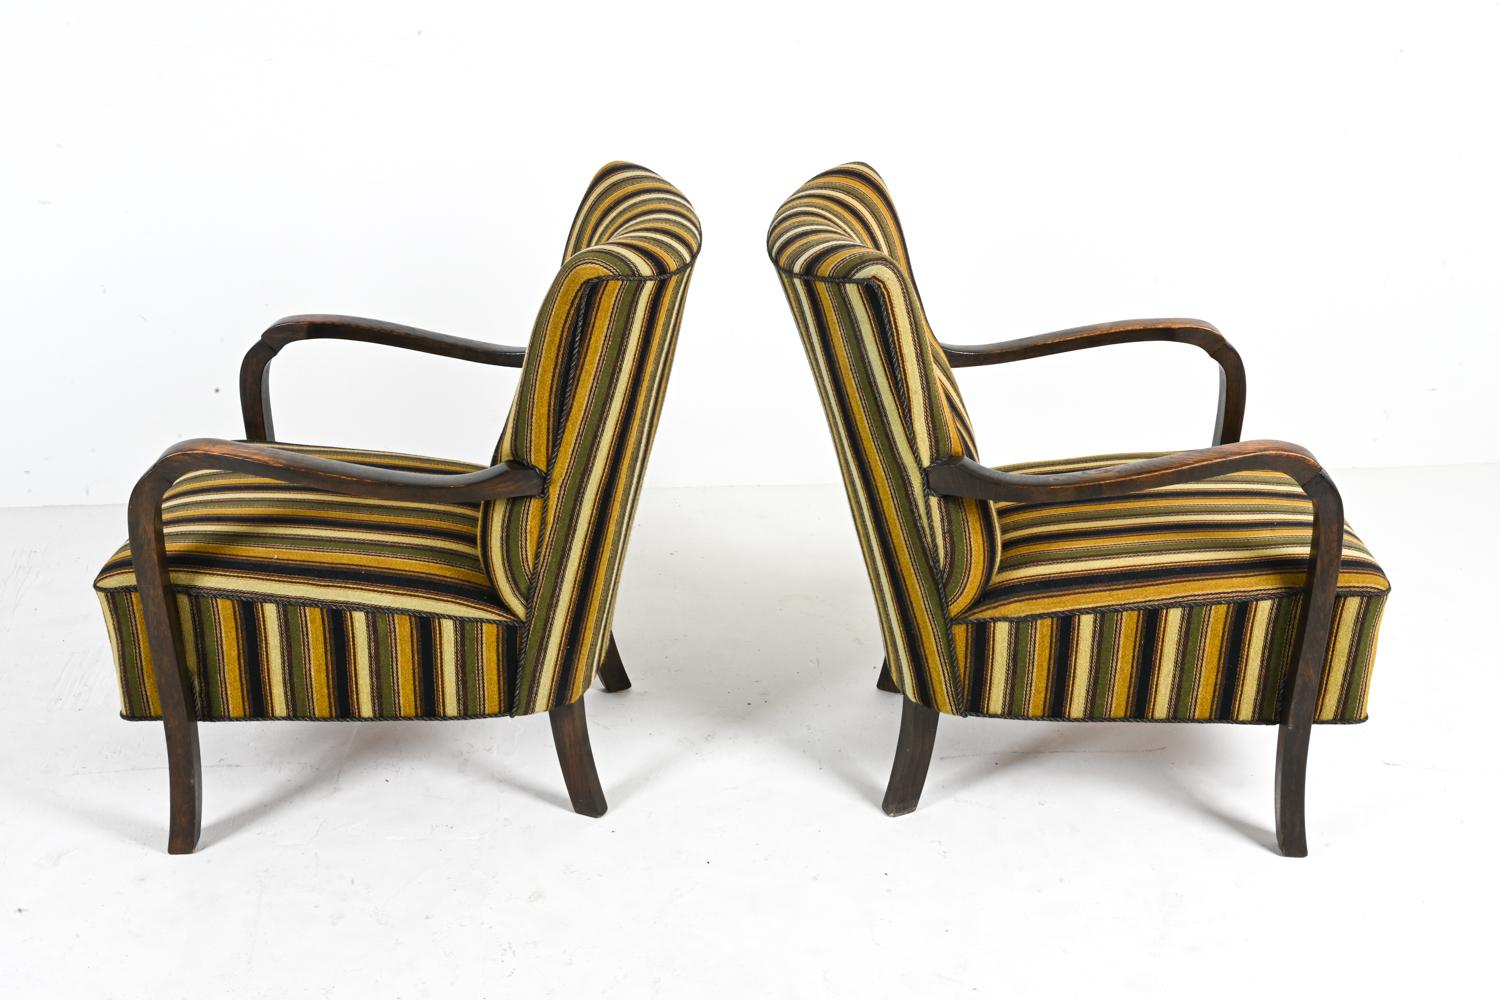 Pair of Fritz Hansen-Style Beechwood Easy Chairs, c. 1940's For Sale 4